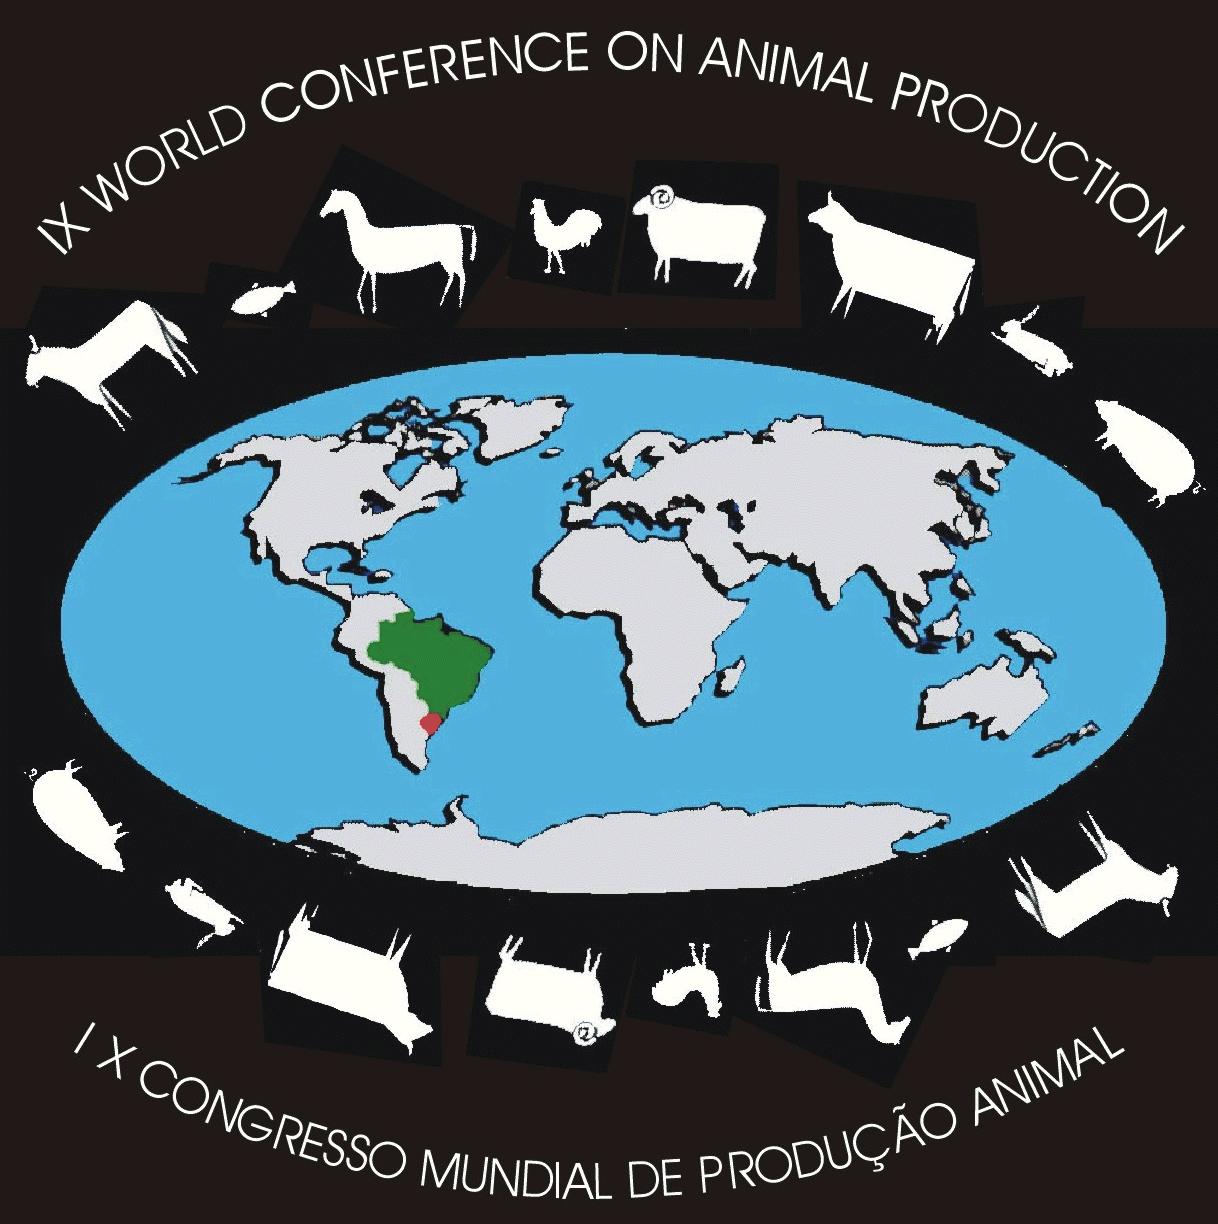 WCAP 2013, World Conference on Animal Production